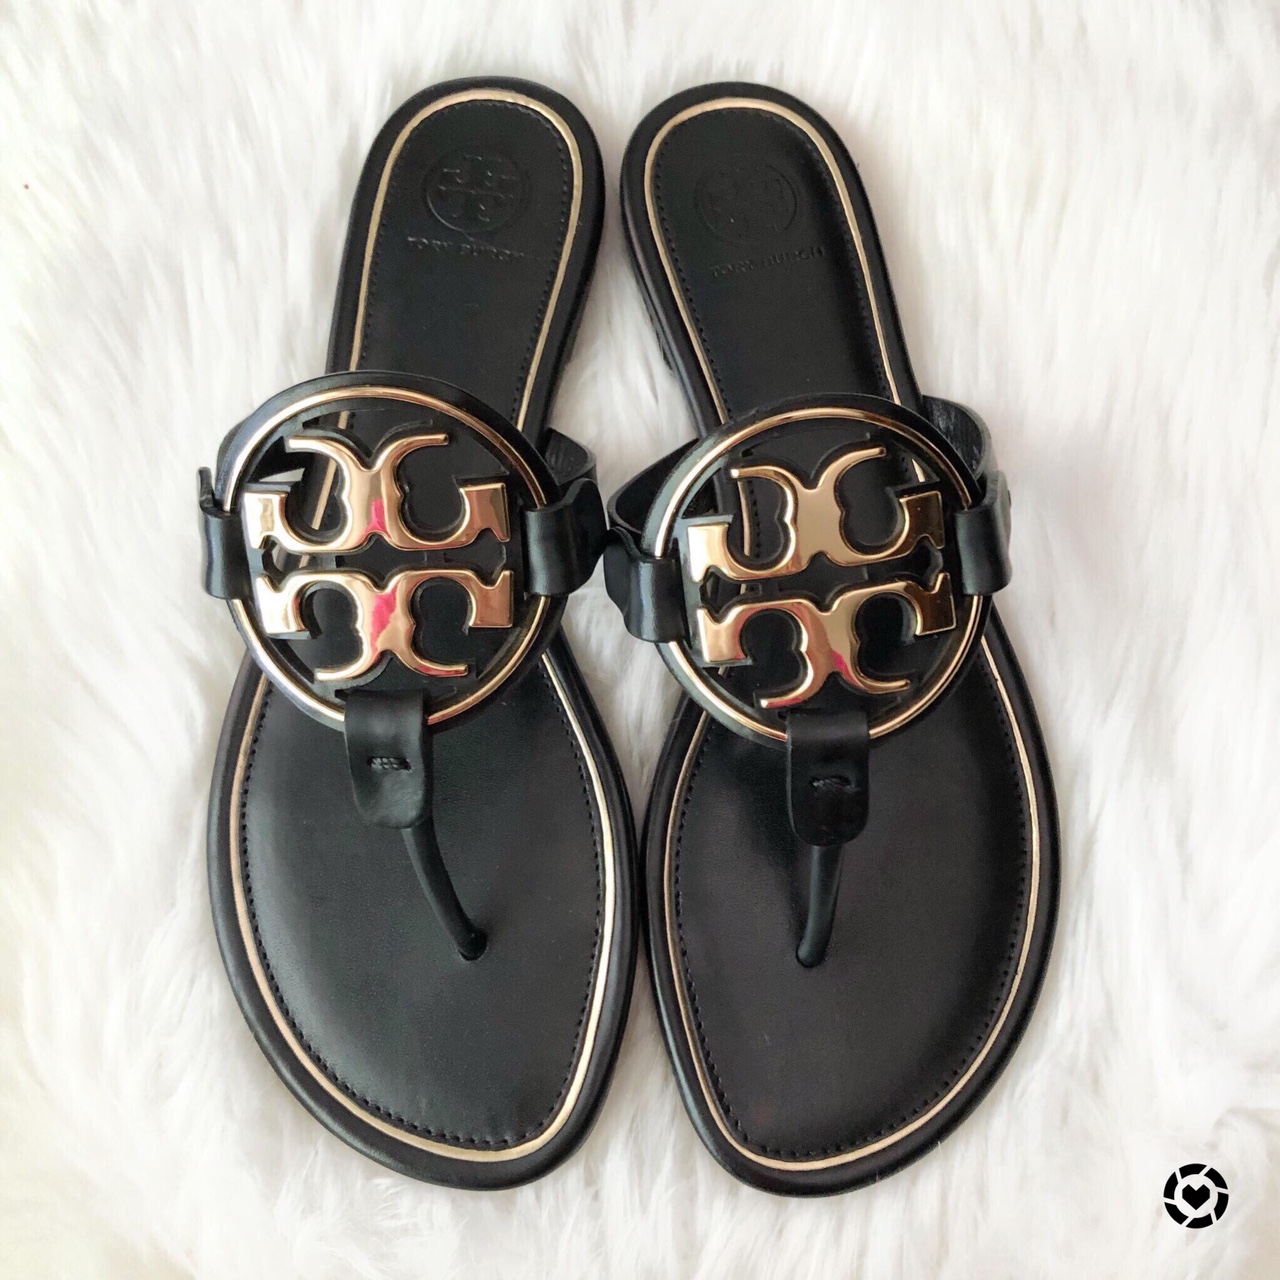 Tory Burch $50 To $100 Off Promo!! One Day Only! - The Double Take Girls